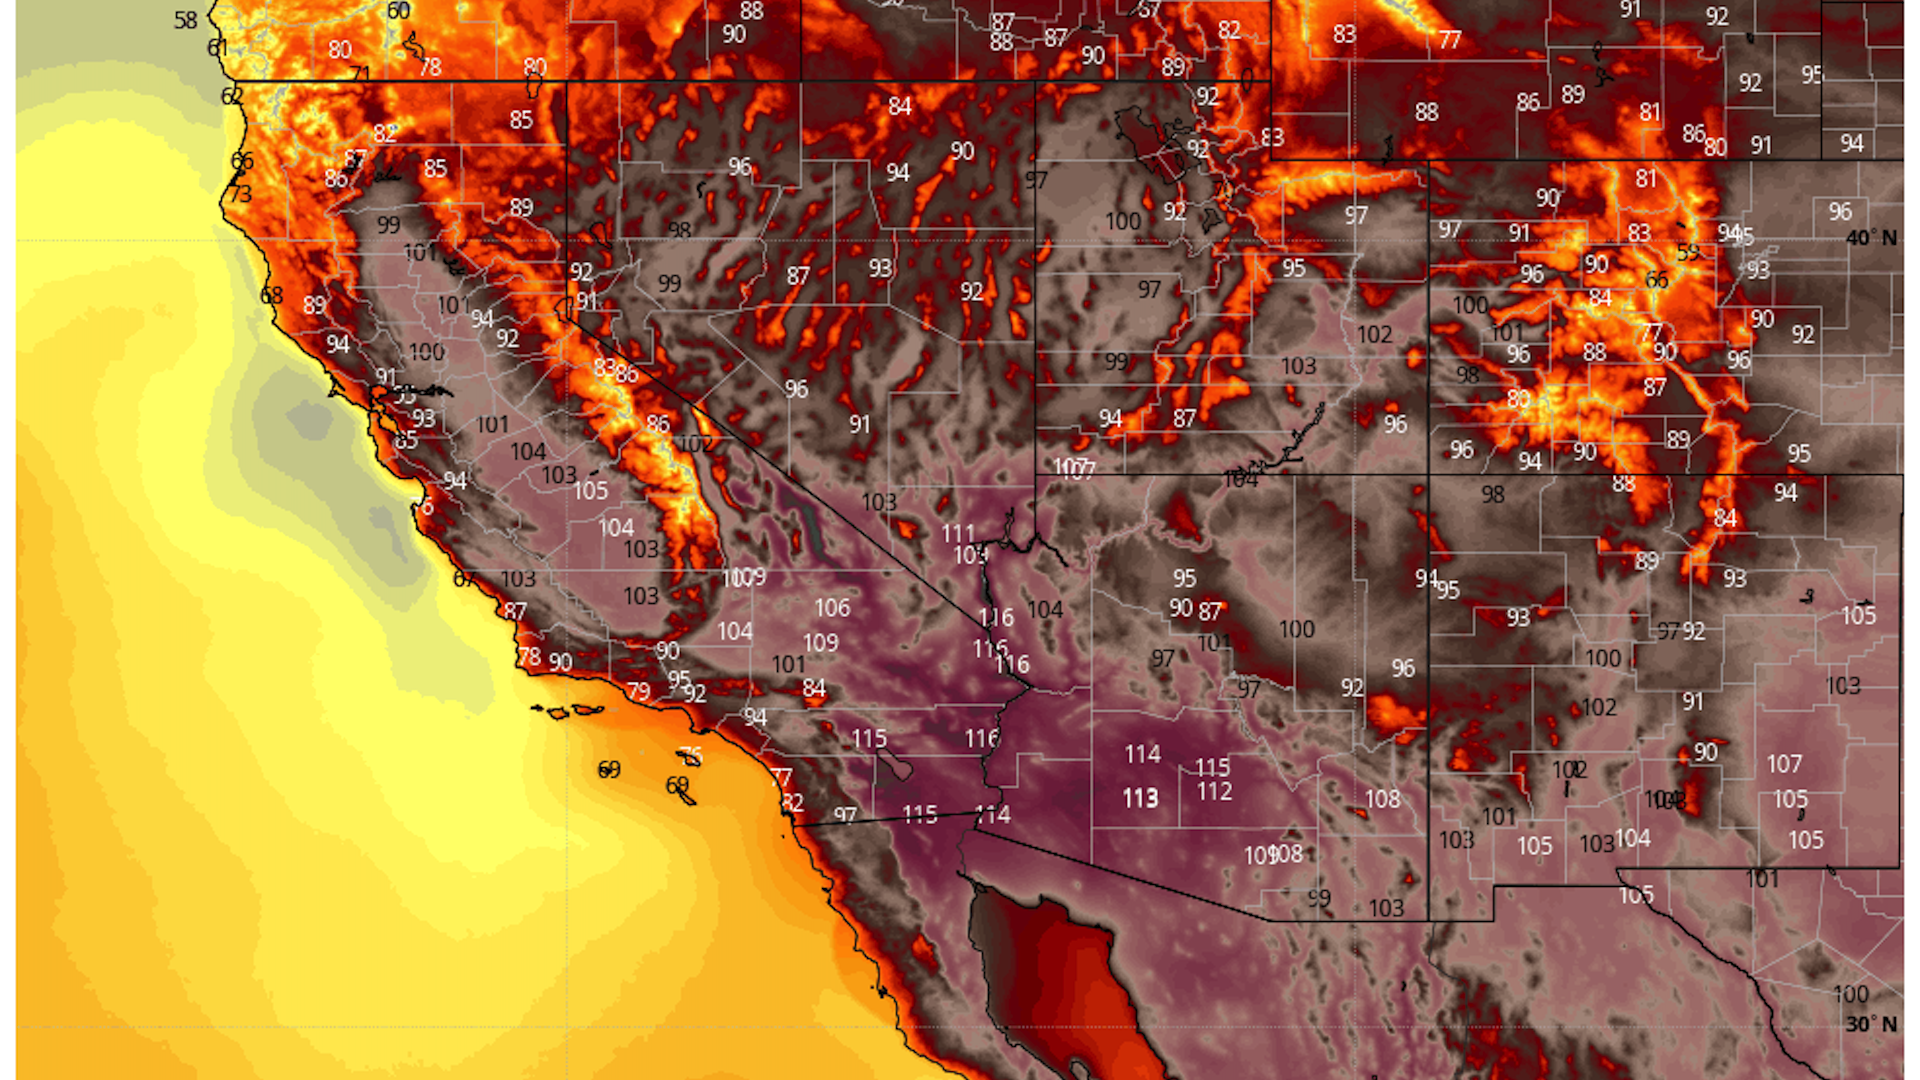 Map showing computer model projection of high temperatures in the Southwest U.S.